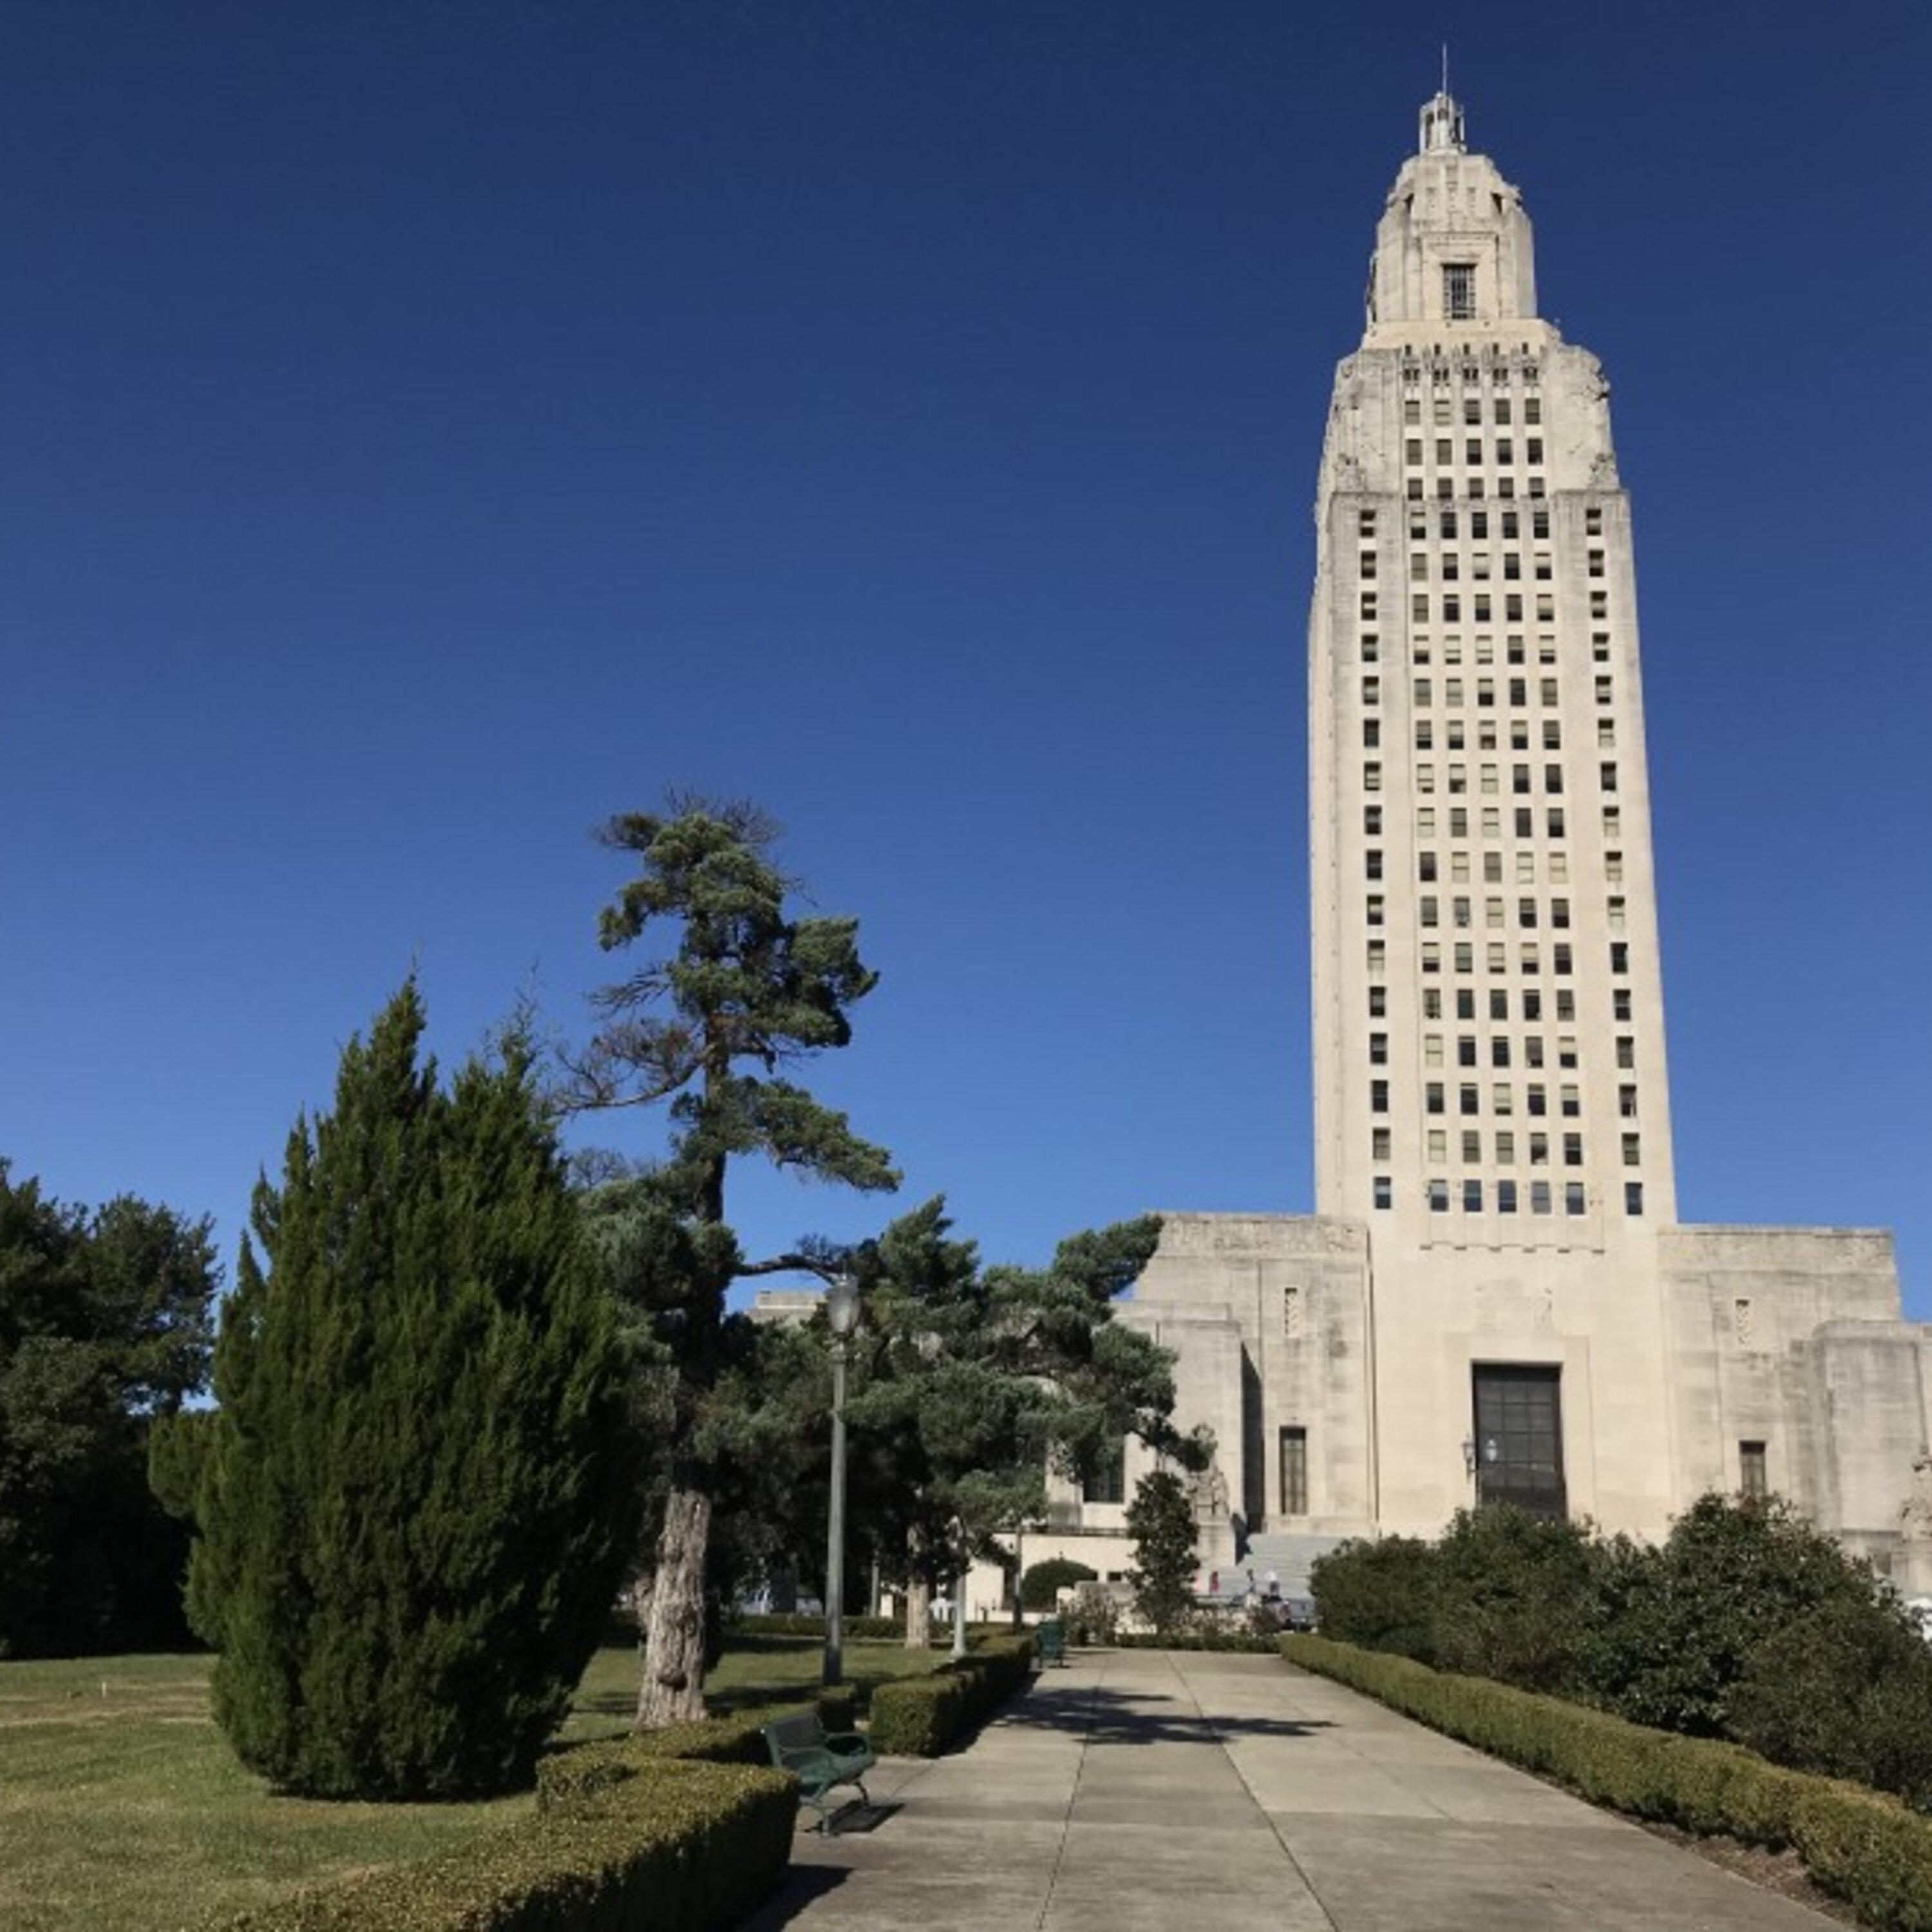 Thumbnail for "Louisiana Considered: LA House Education Committee Approves Ban On Transgender Student-Athletes, Tort Reform Measures, Amtrak Gulf Coast Line Faces Challenges, NovaVax Trials In Baton Rouge".